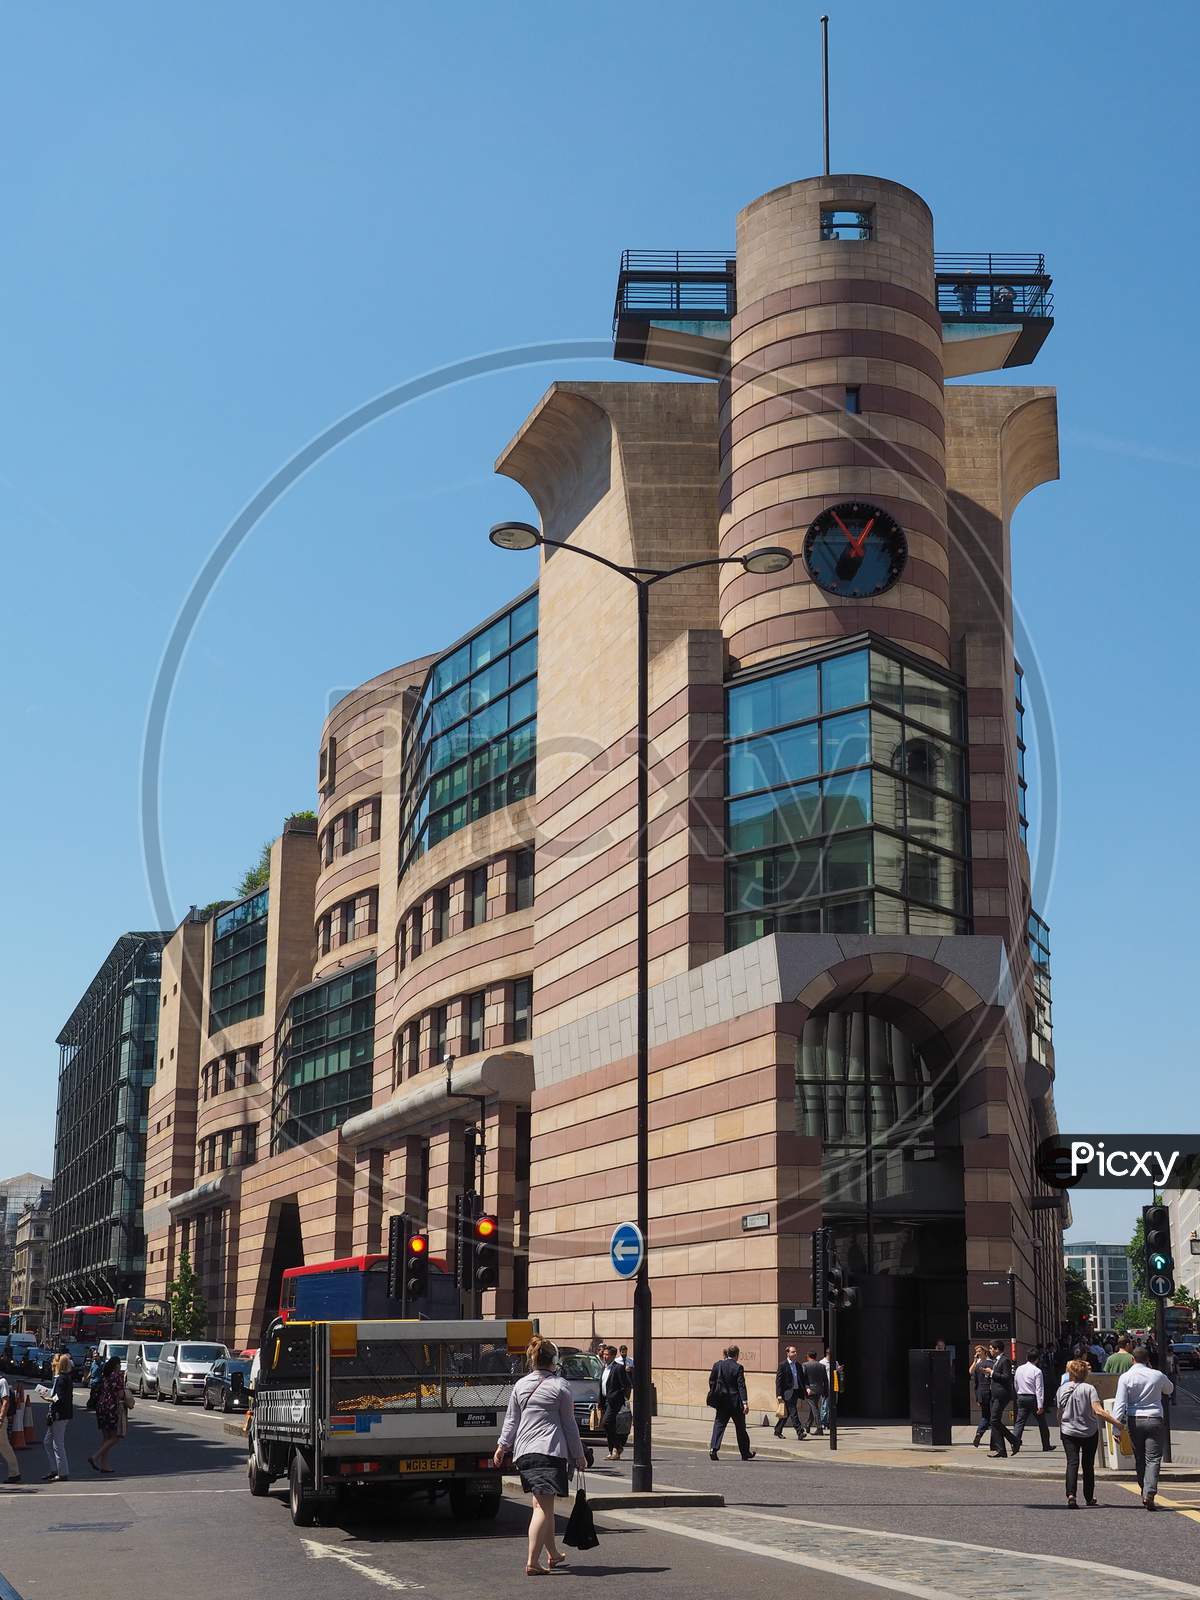 London, Uk - June 11, 2015: No 1 Poultry Is An Office And Retail Building Designed By James Stirling In The City